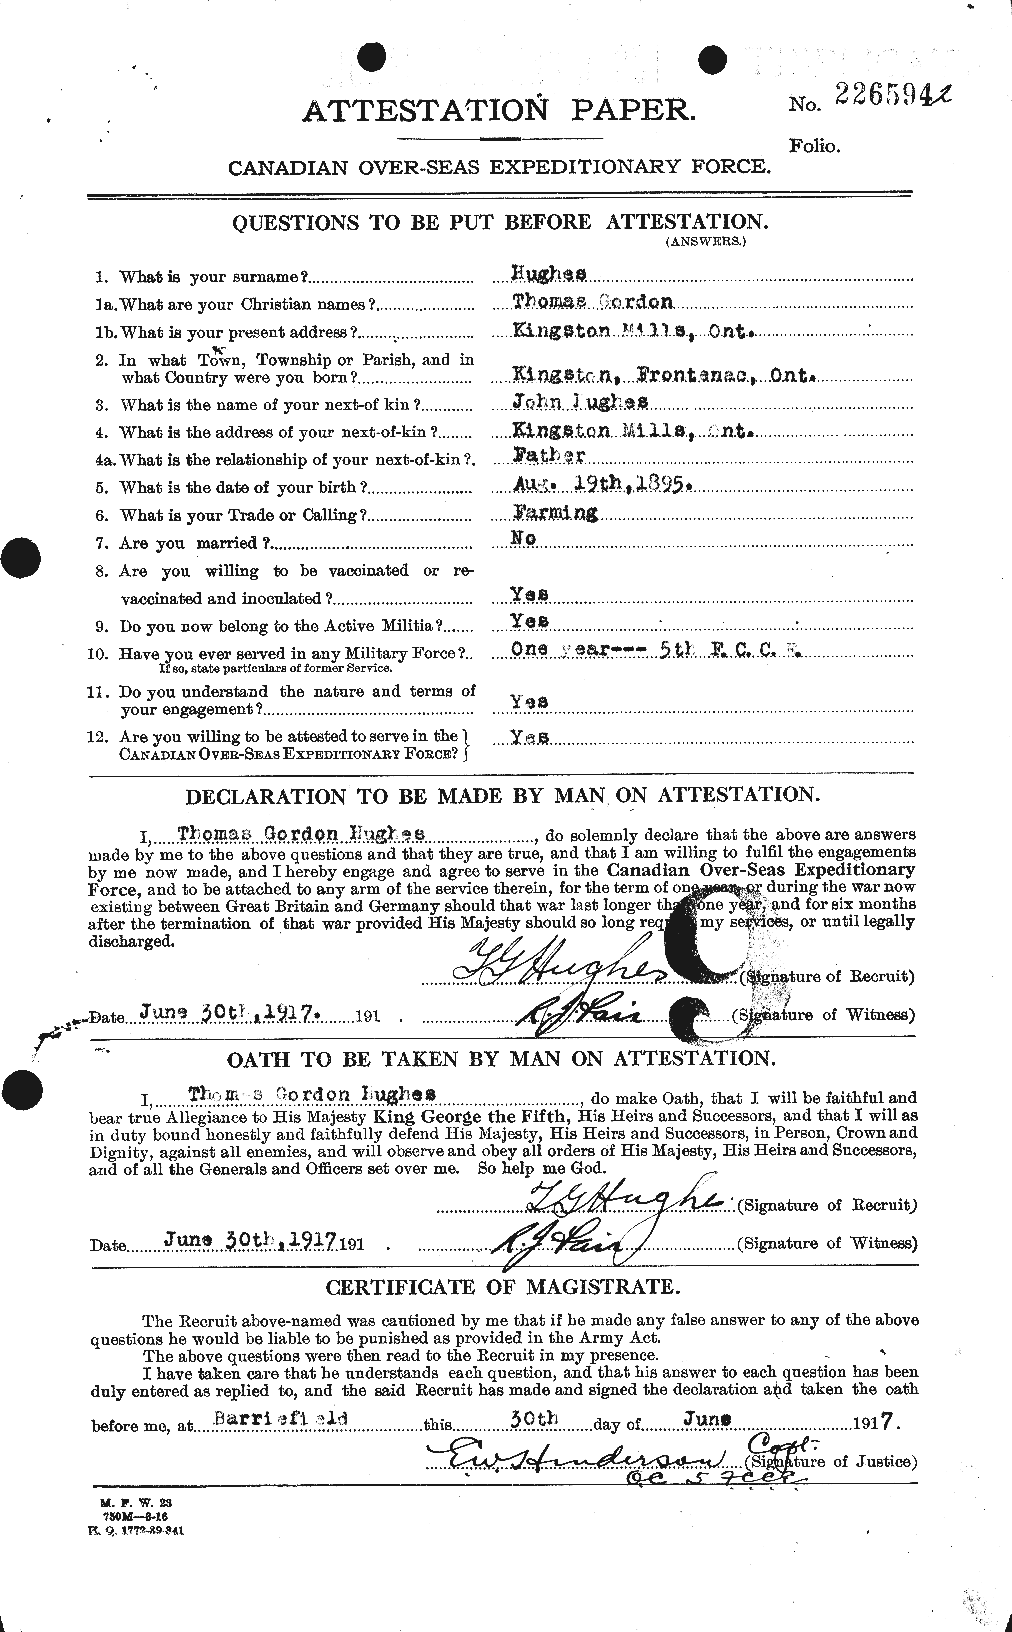 Personnel Records of the First World War - CEF 405833a